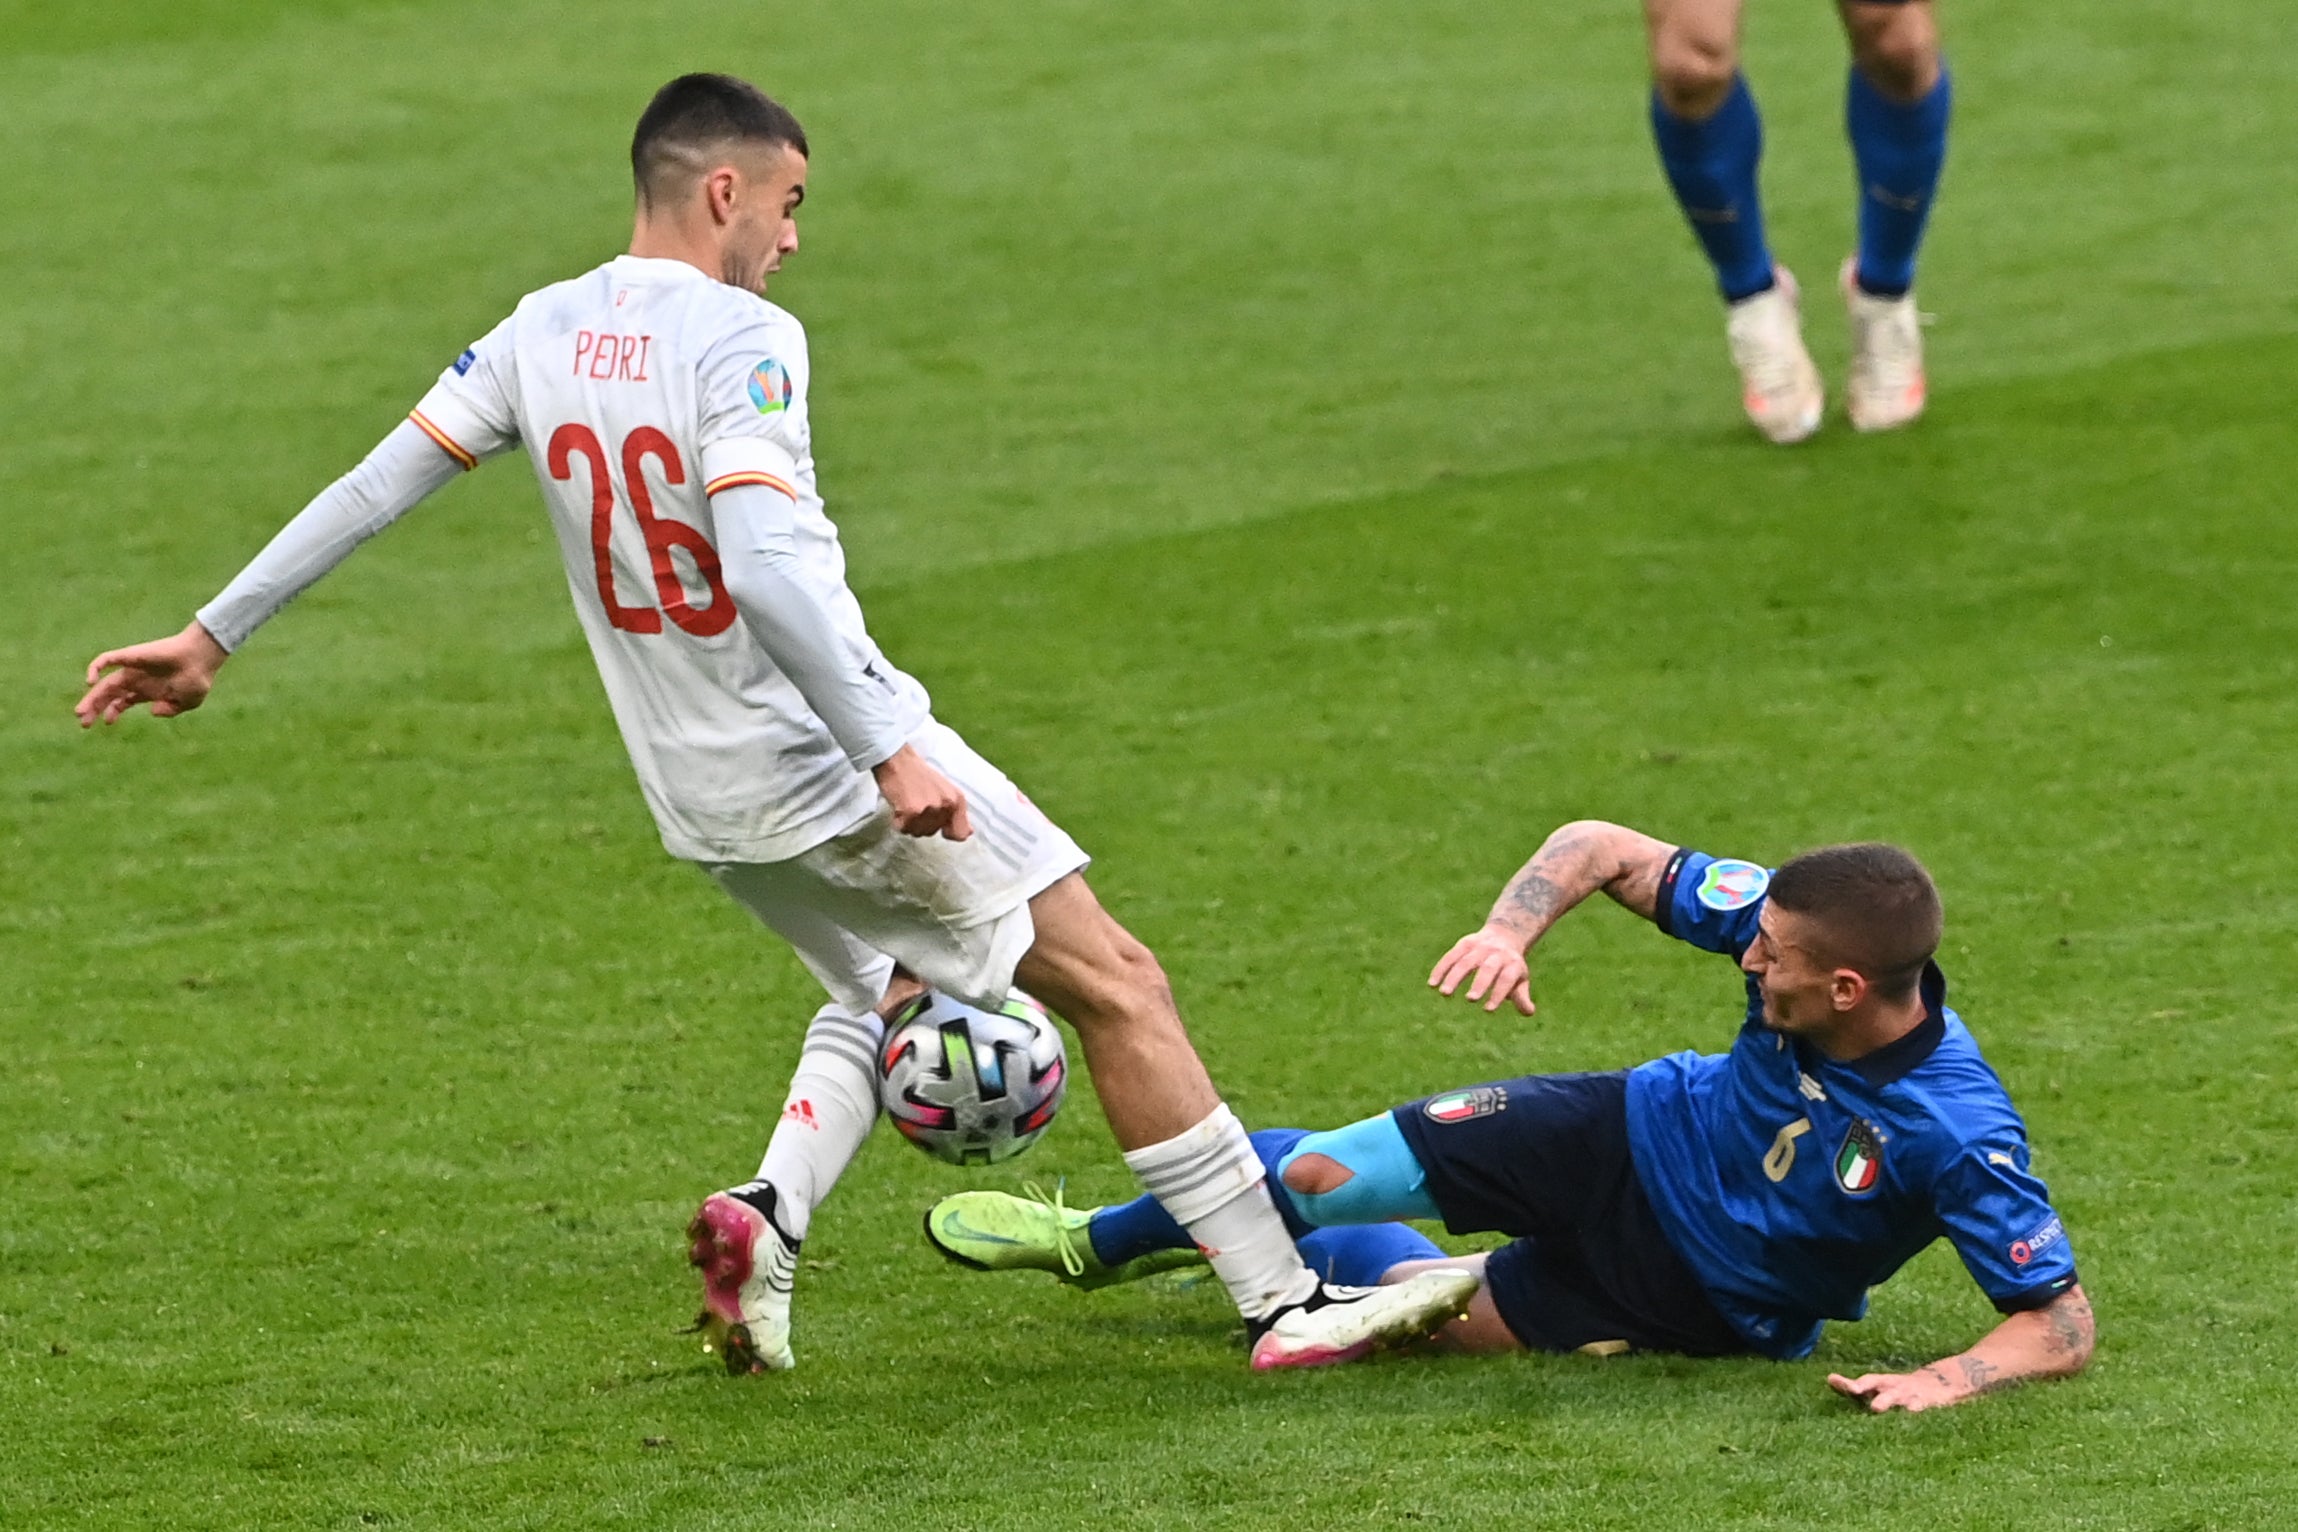 Marco Verratti and Italy’s midfield are set to provide Rice and Phillips their biggest test of the tournament